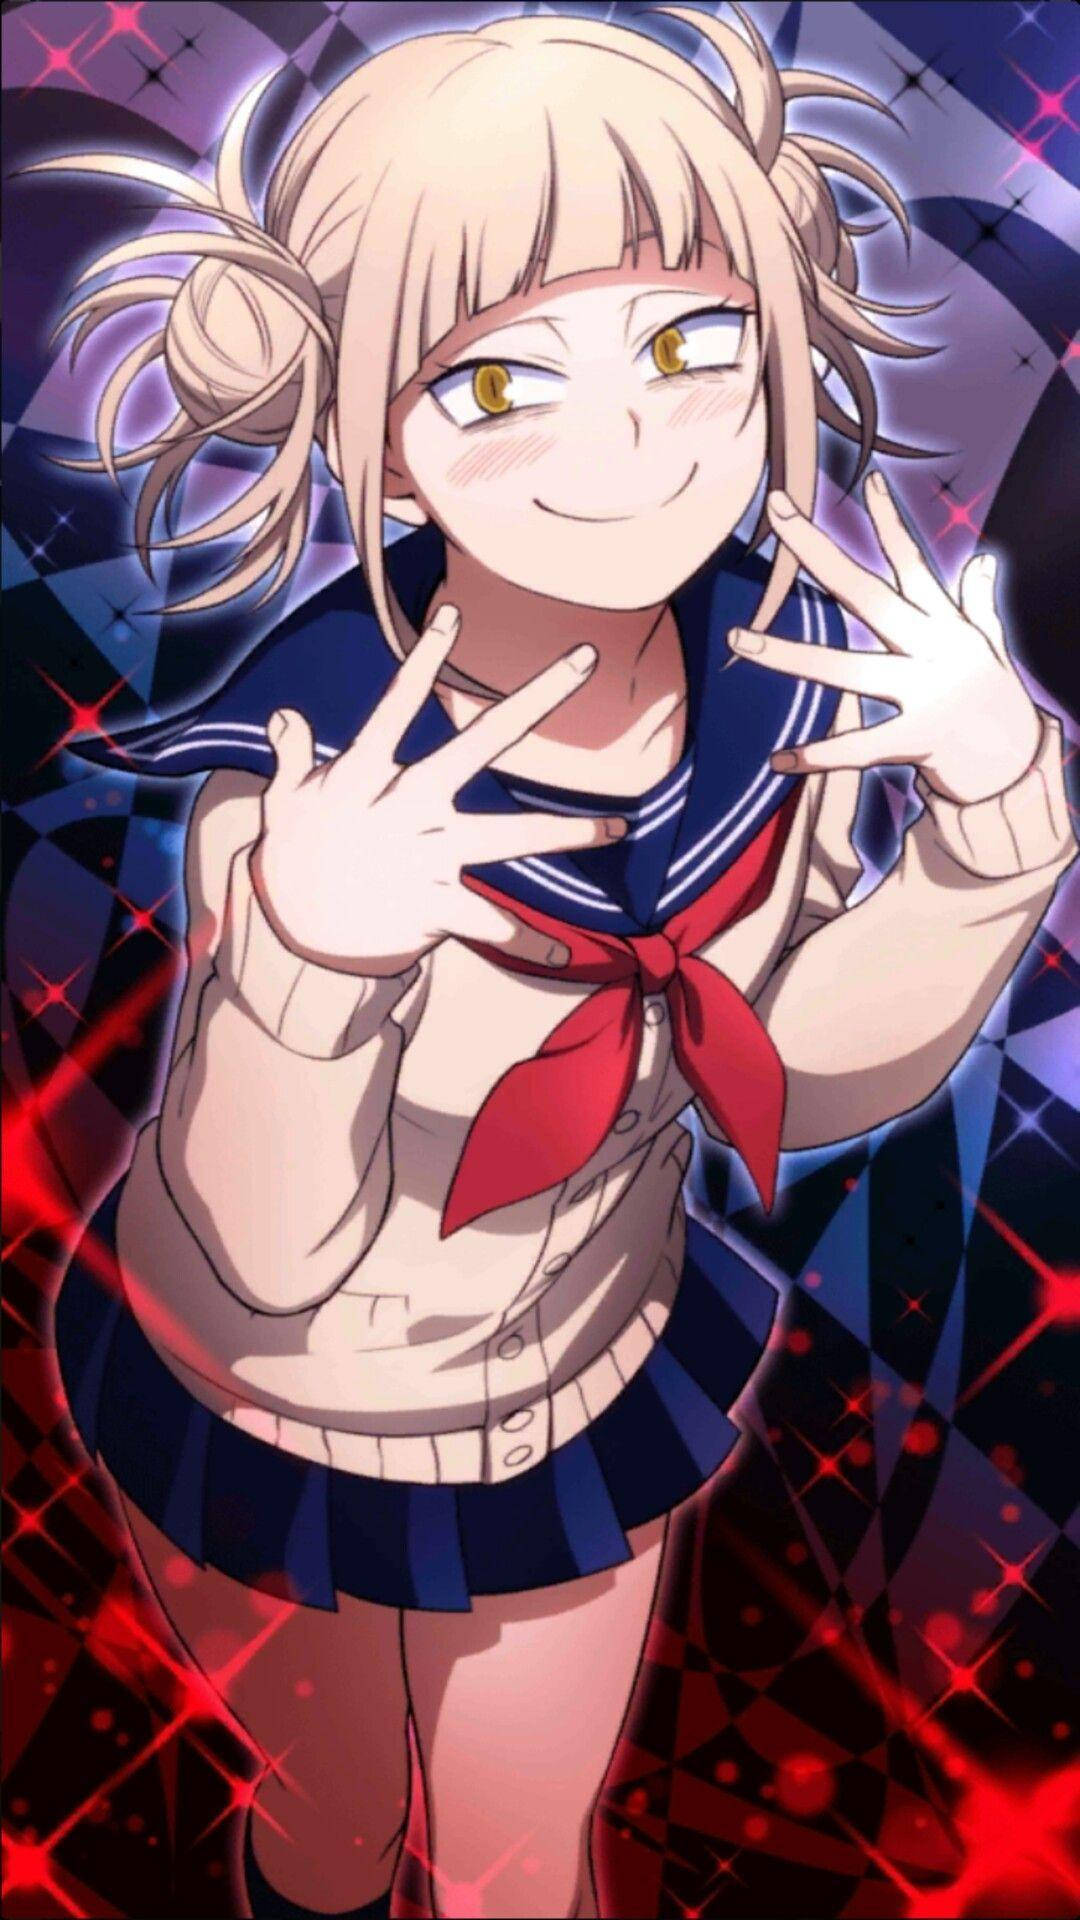 1080X1920 Himiko Toga Wallpaper and Background